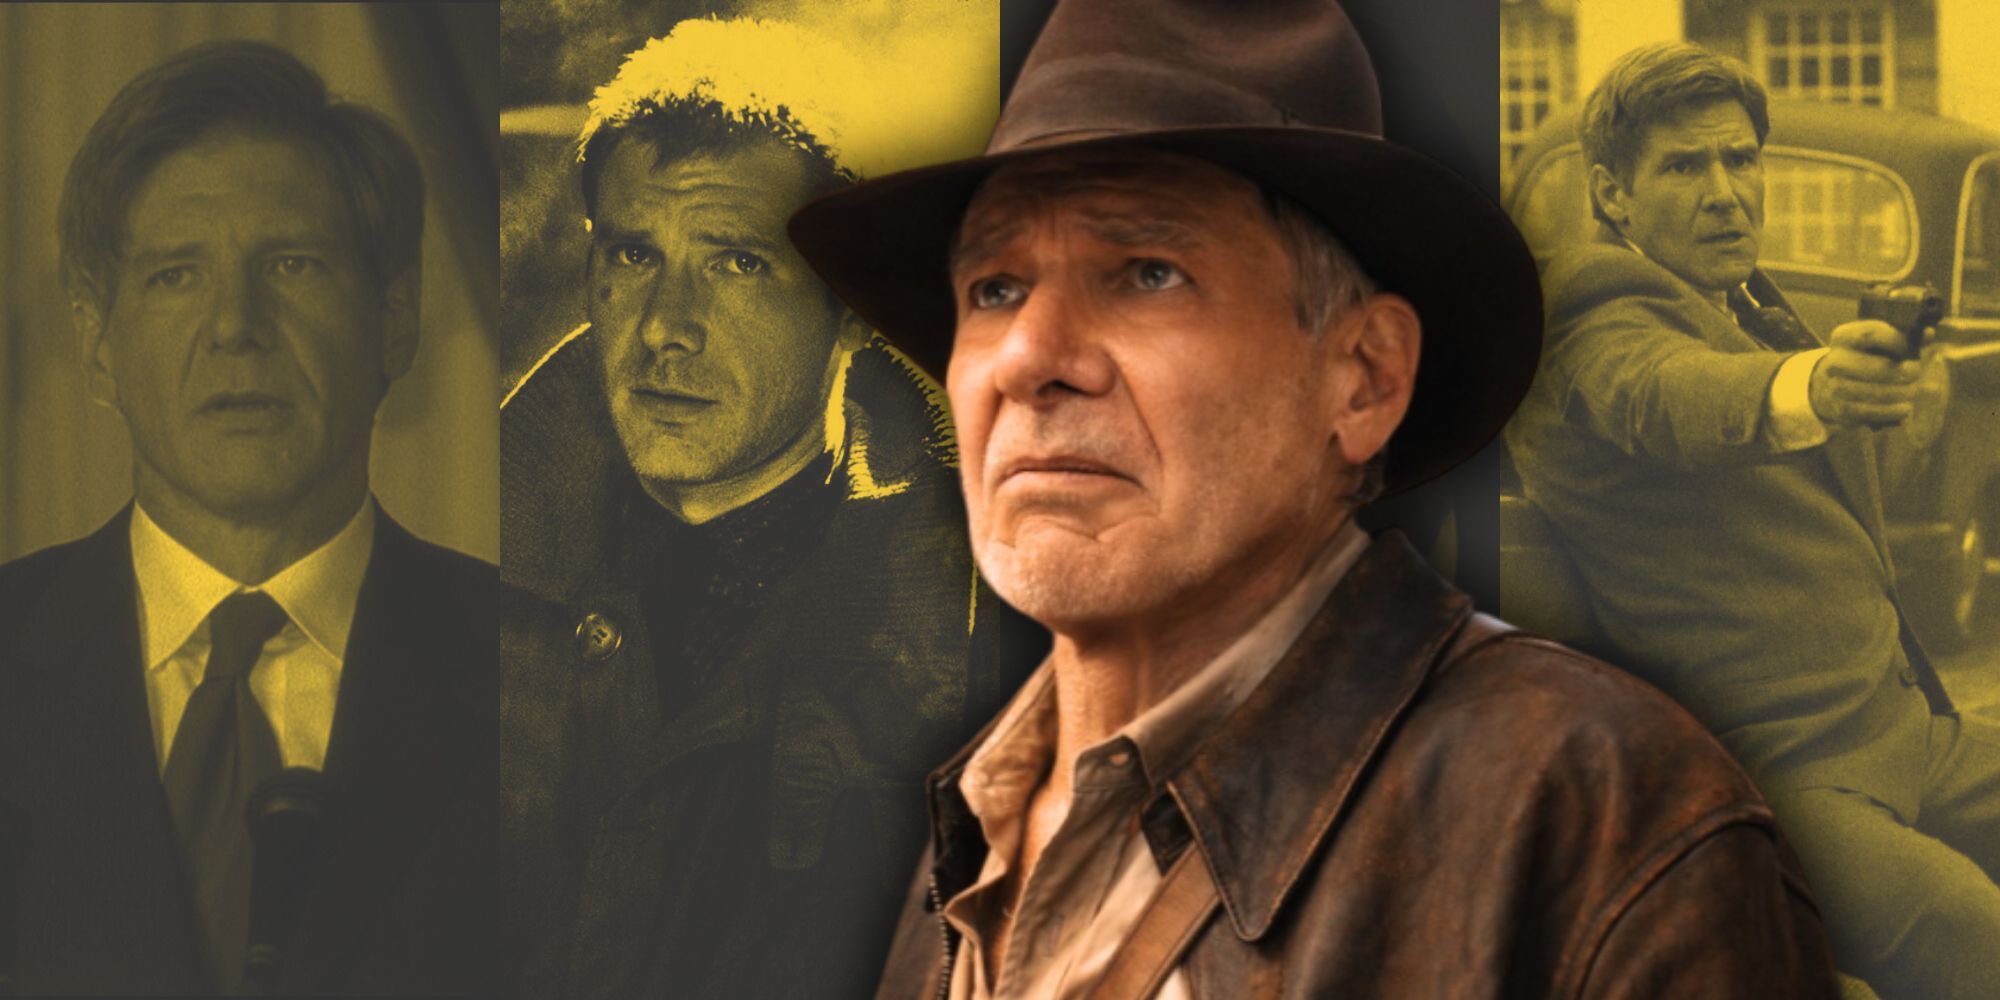 Harrison Ford in Air Force One, Blade Runner, Indiana Jones, and Jack Ryan